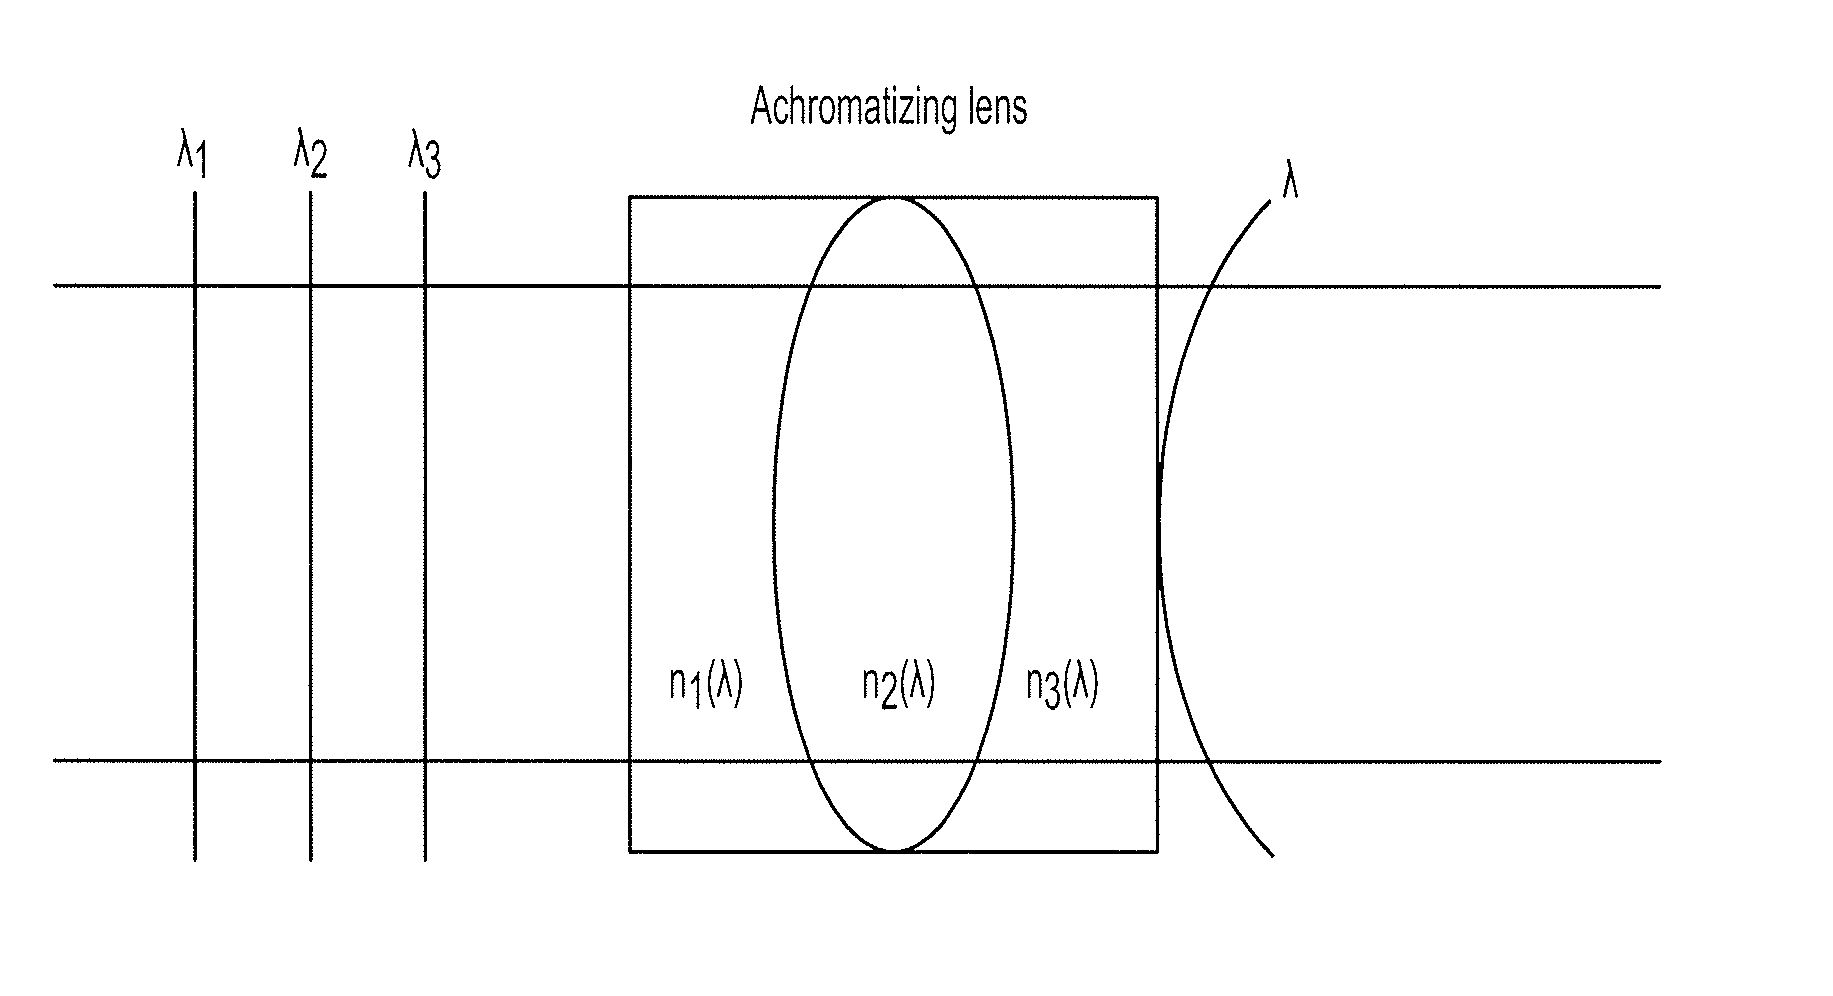 Tunable achromatizing optical apparatus, methods, and applications